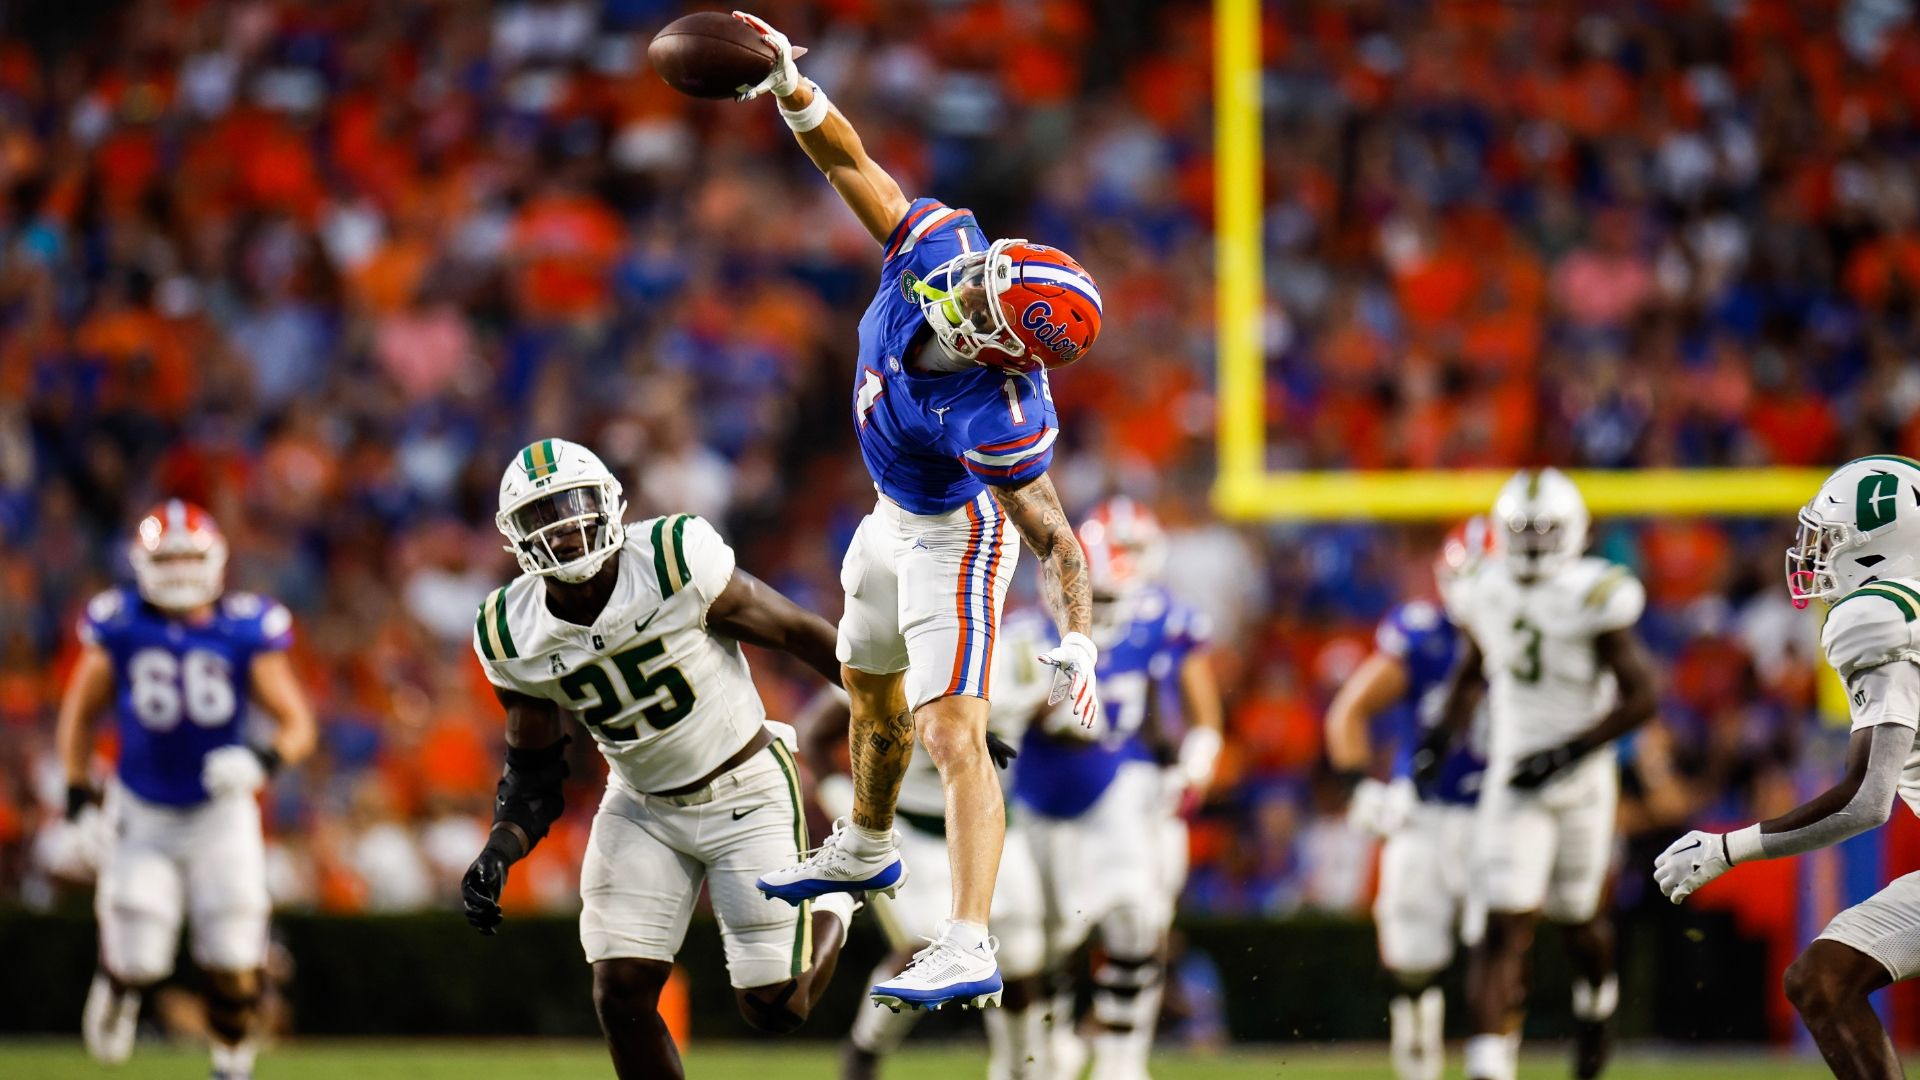 Pearsall's one-handed grab for Gators already legendary